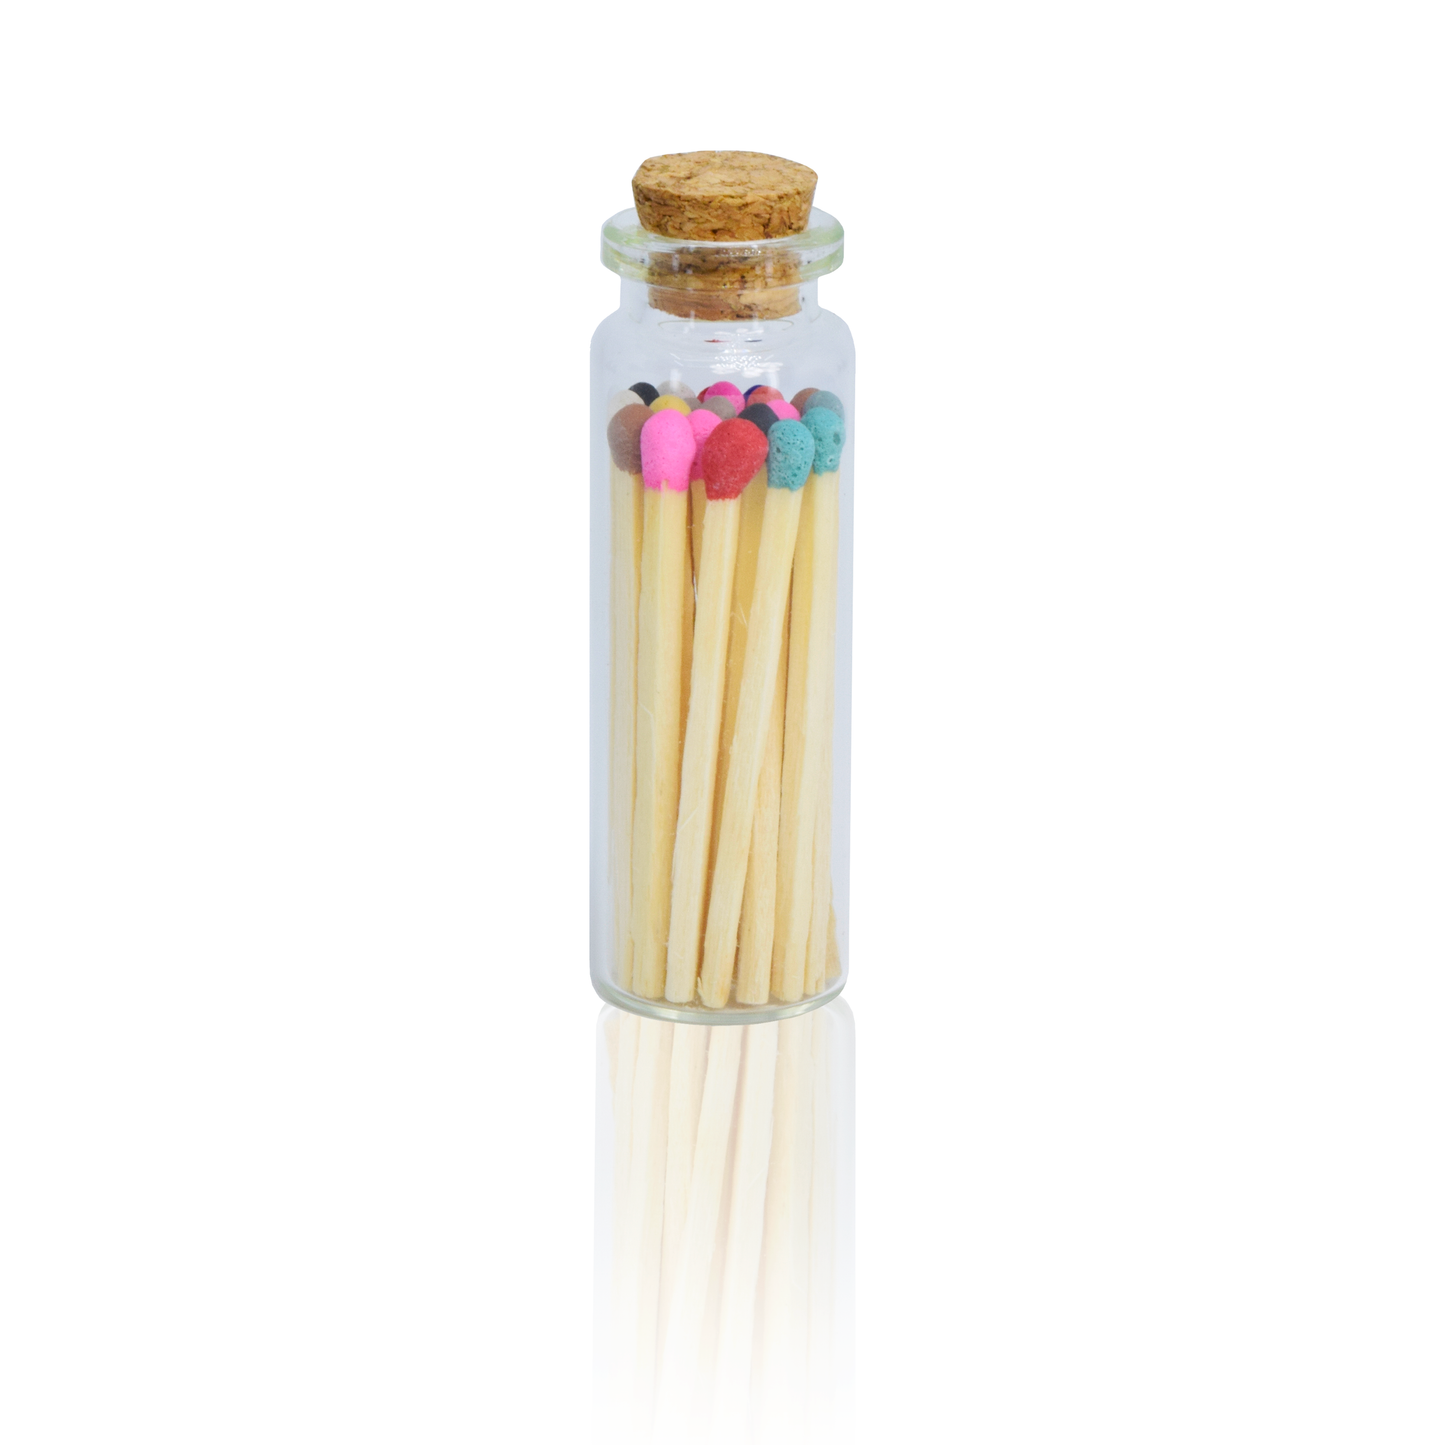 Small Match Bottles - Safety Matches in Jars - Rainbow